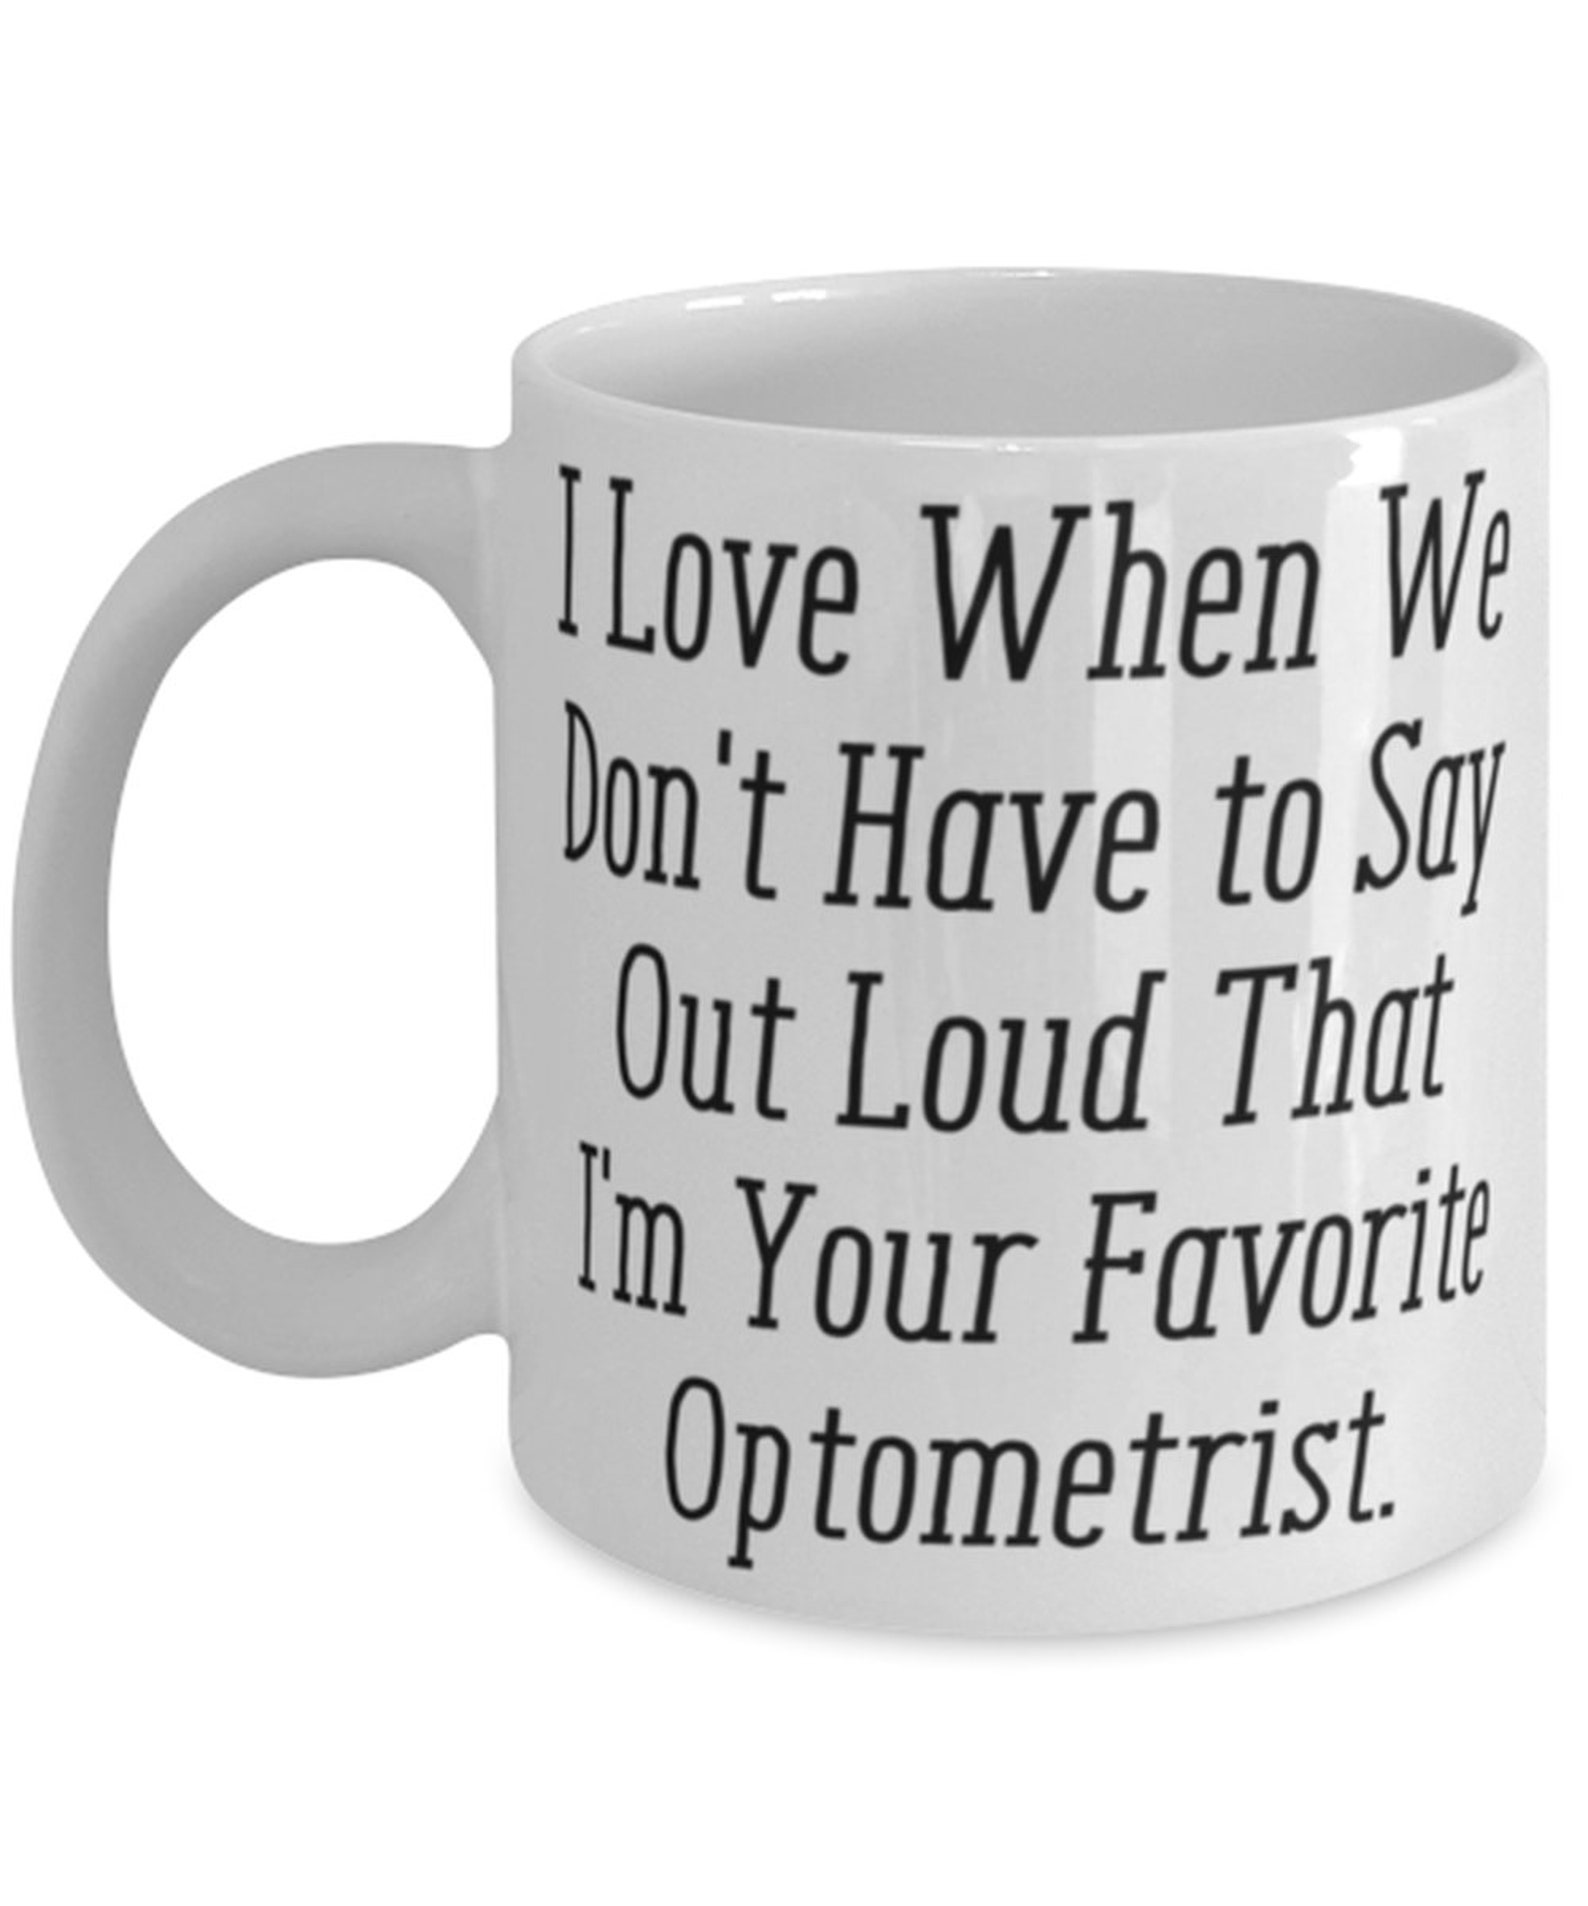 New Optometrist Gifts I Love When We Don't Have To Say Out Loud That I ... We Have Your Back